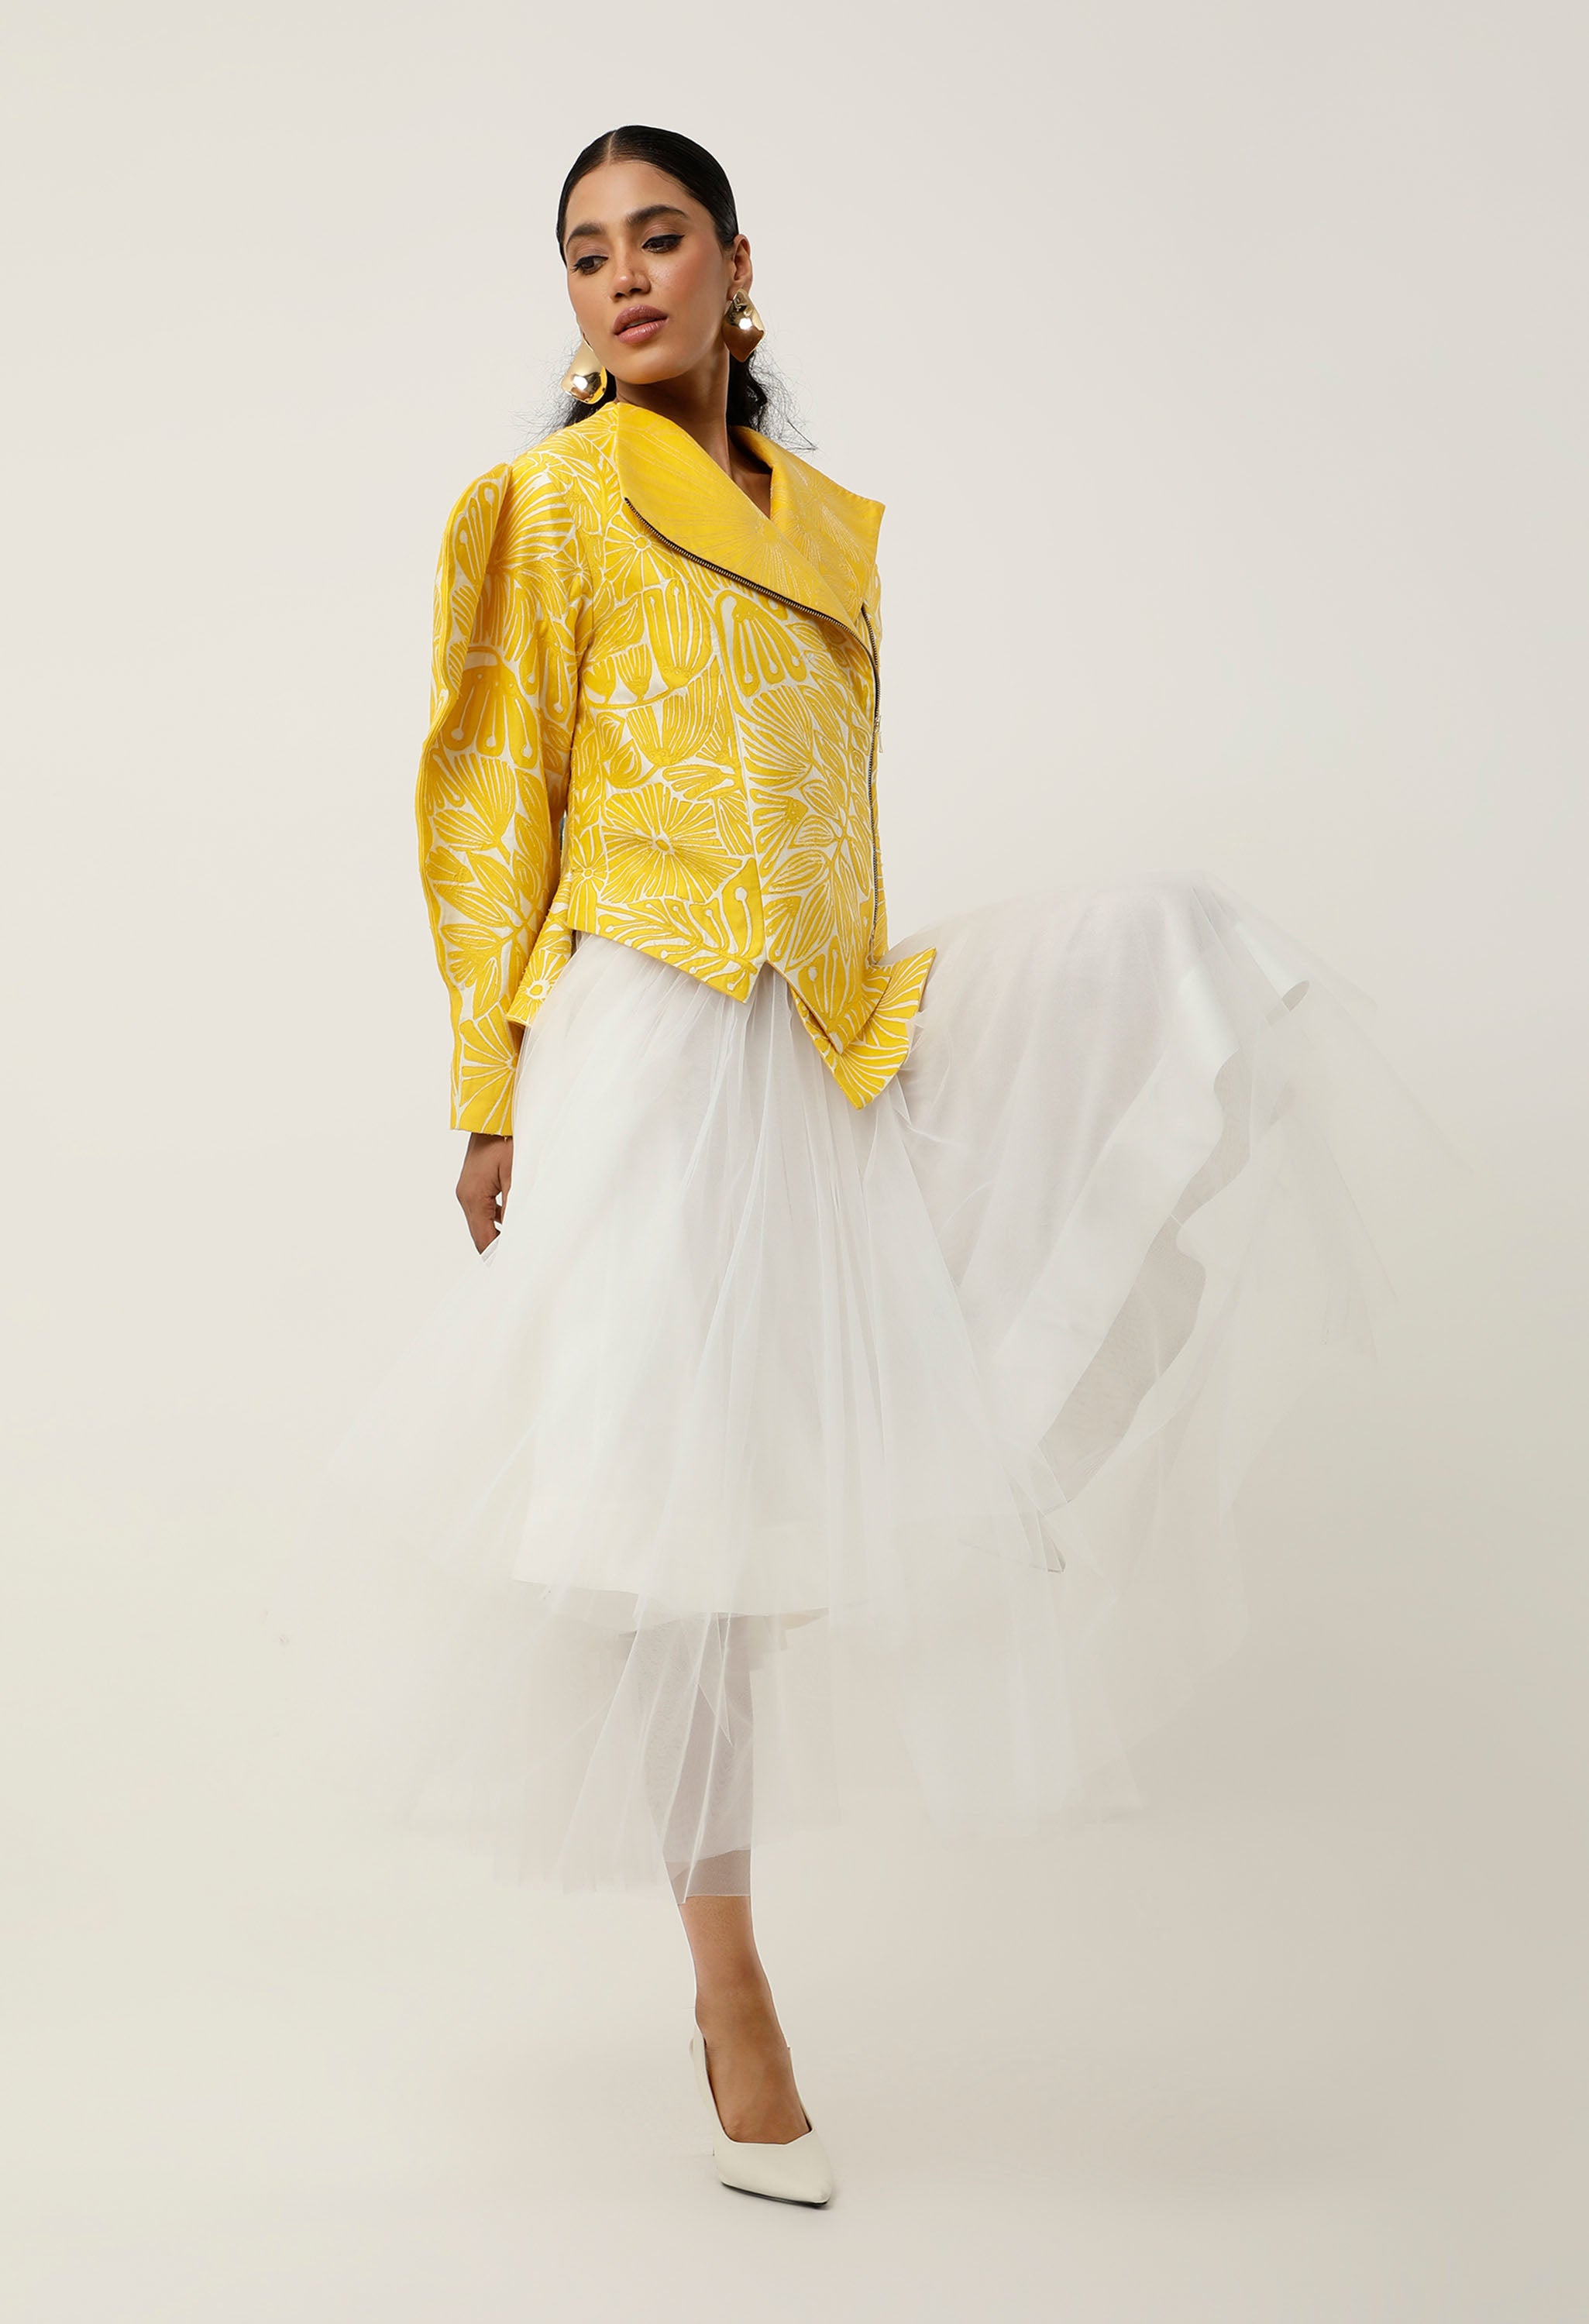 3D SLEEVED FLORAL CUTWORK JACKET WITH DOUBLE LAYER TULLE